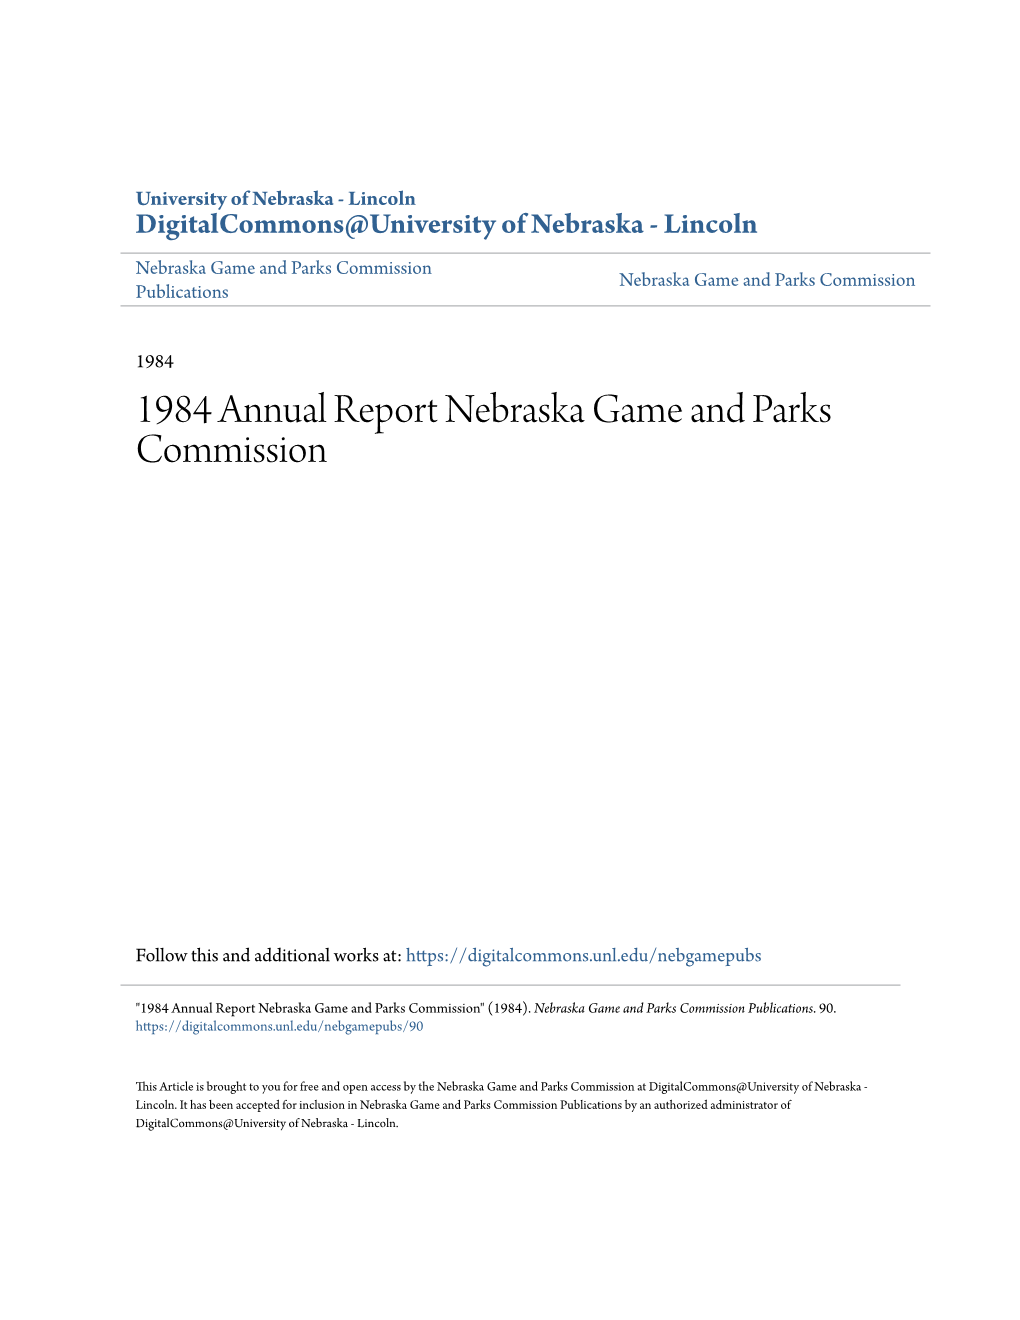 1984 Annual Report Nebraska Game and Parks Commission